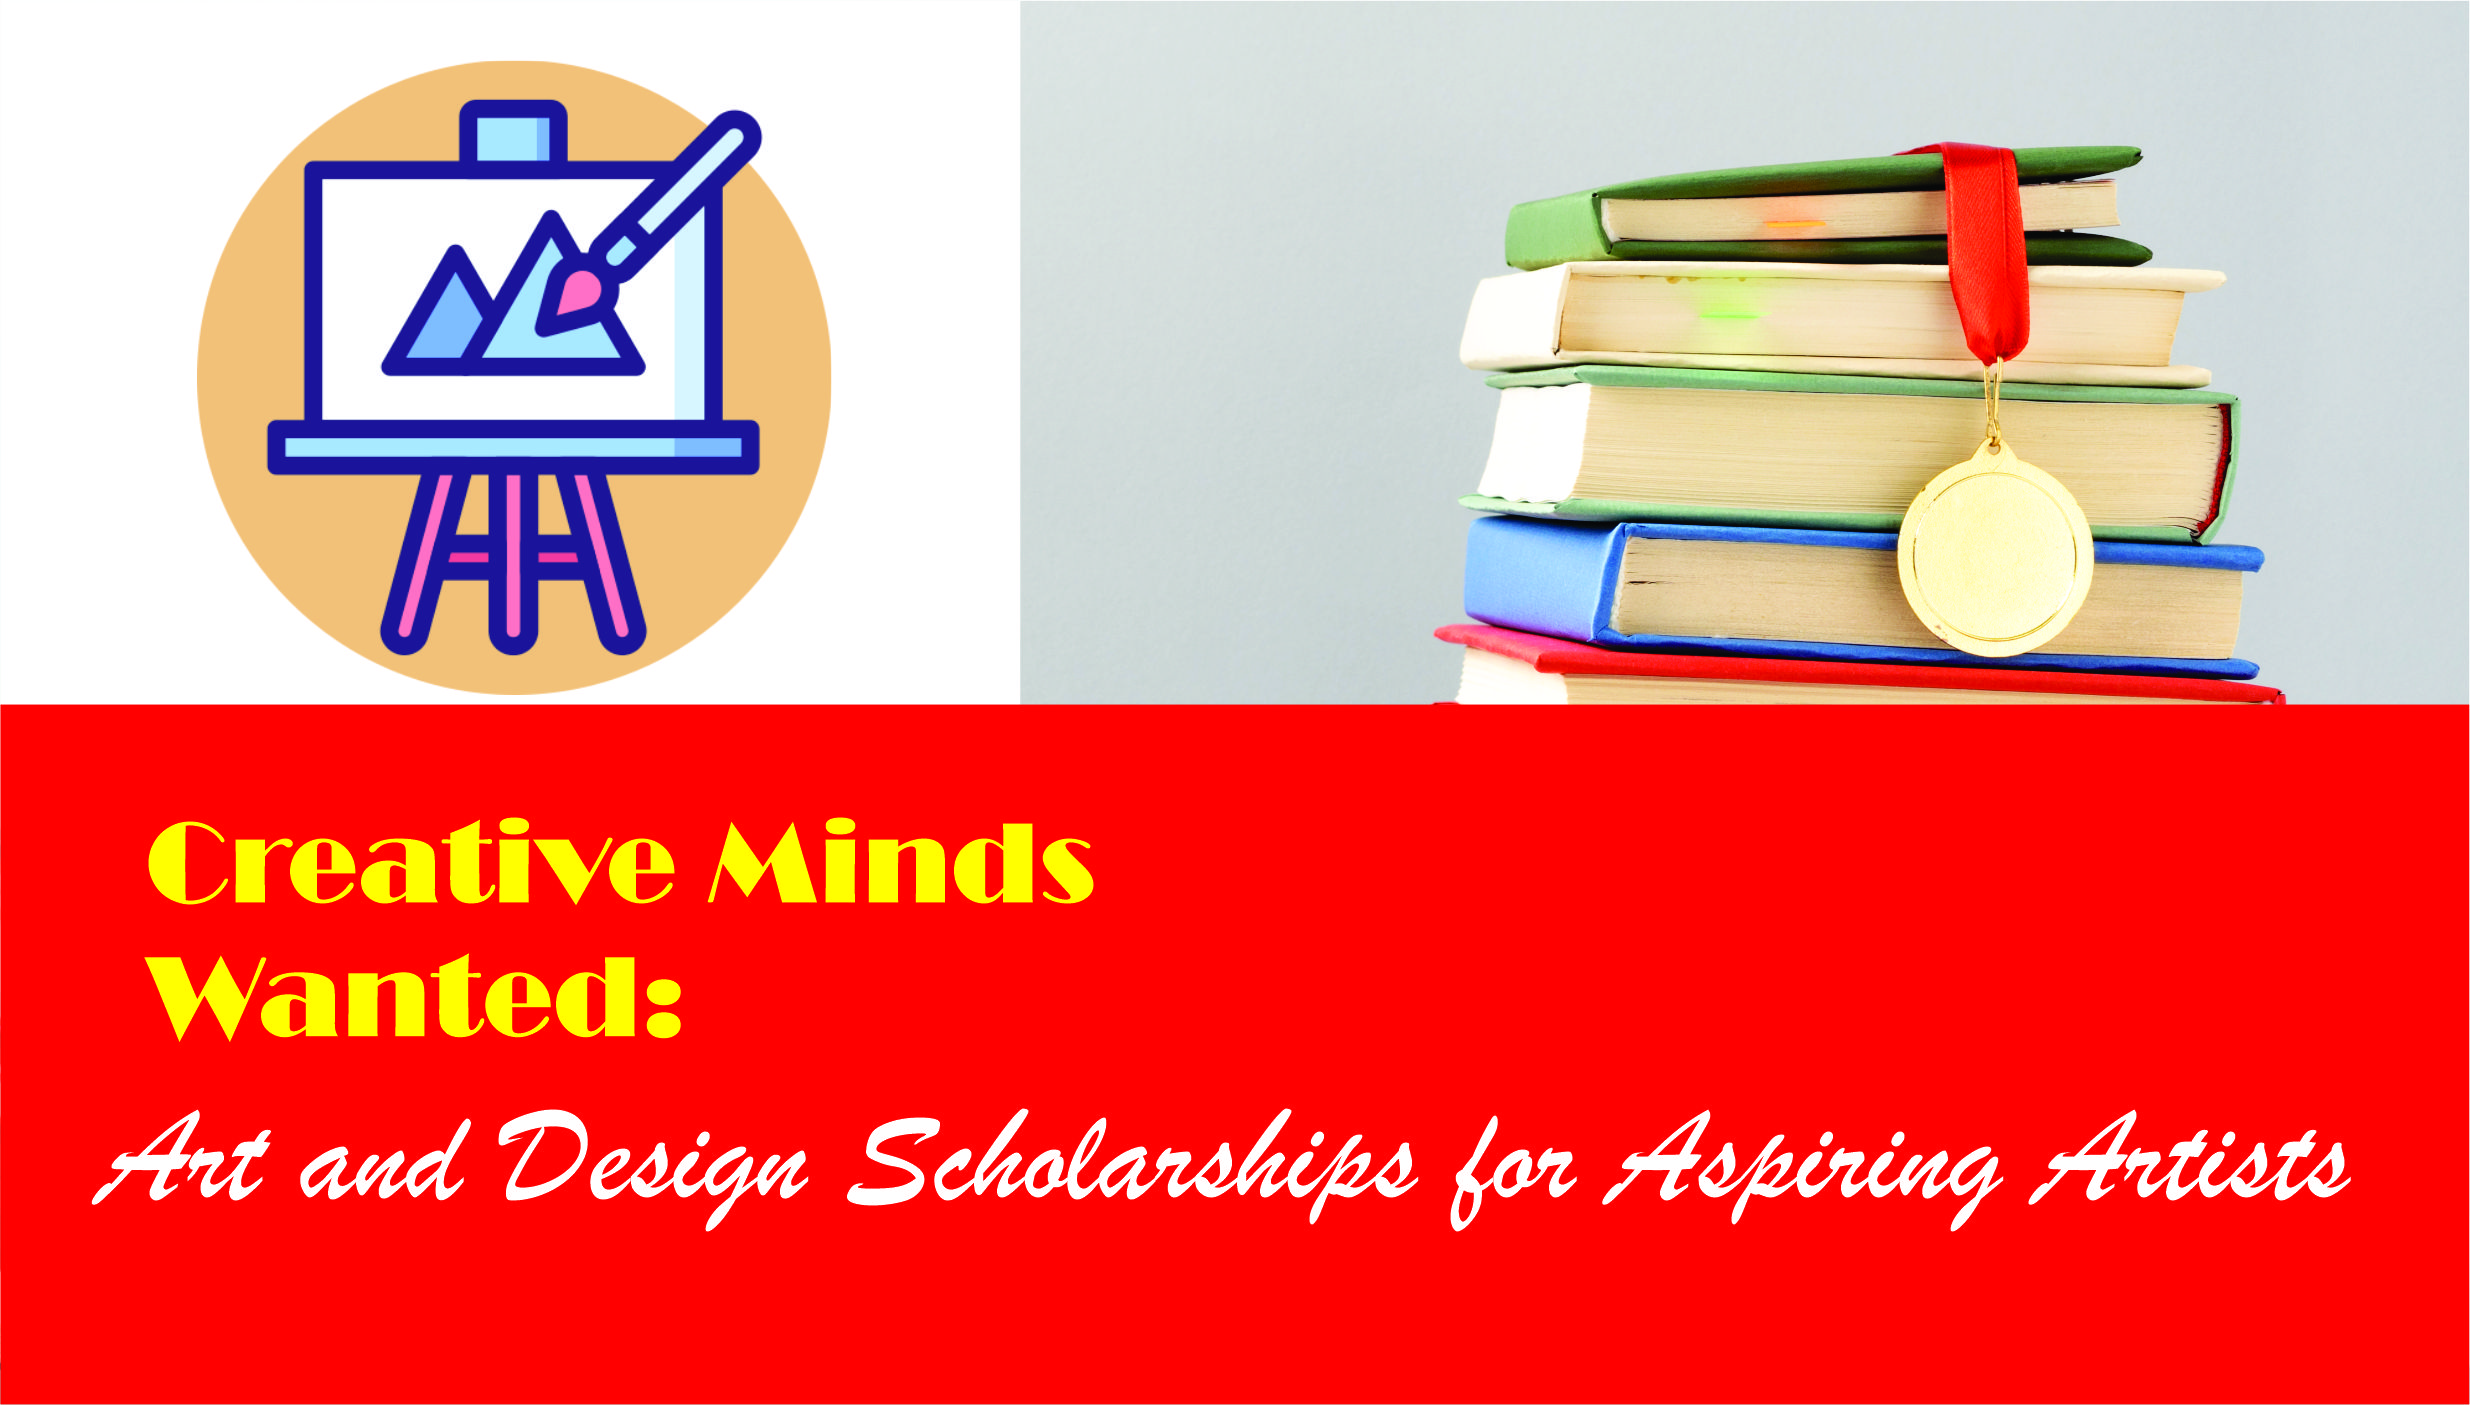 Creative Minds Wanted: Art and Design Scholarships for Aspiring Artists